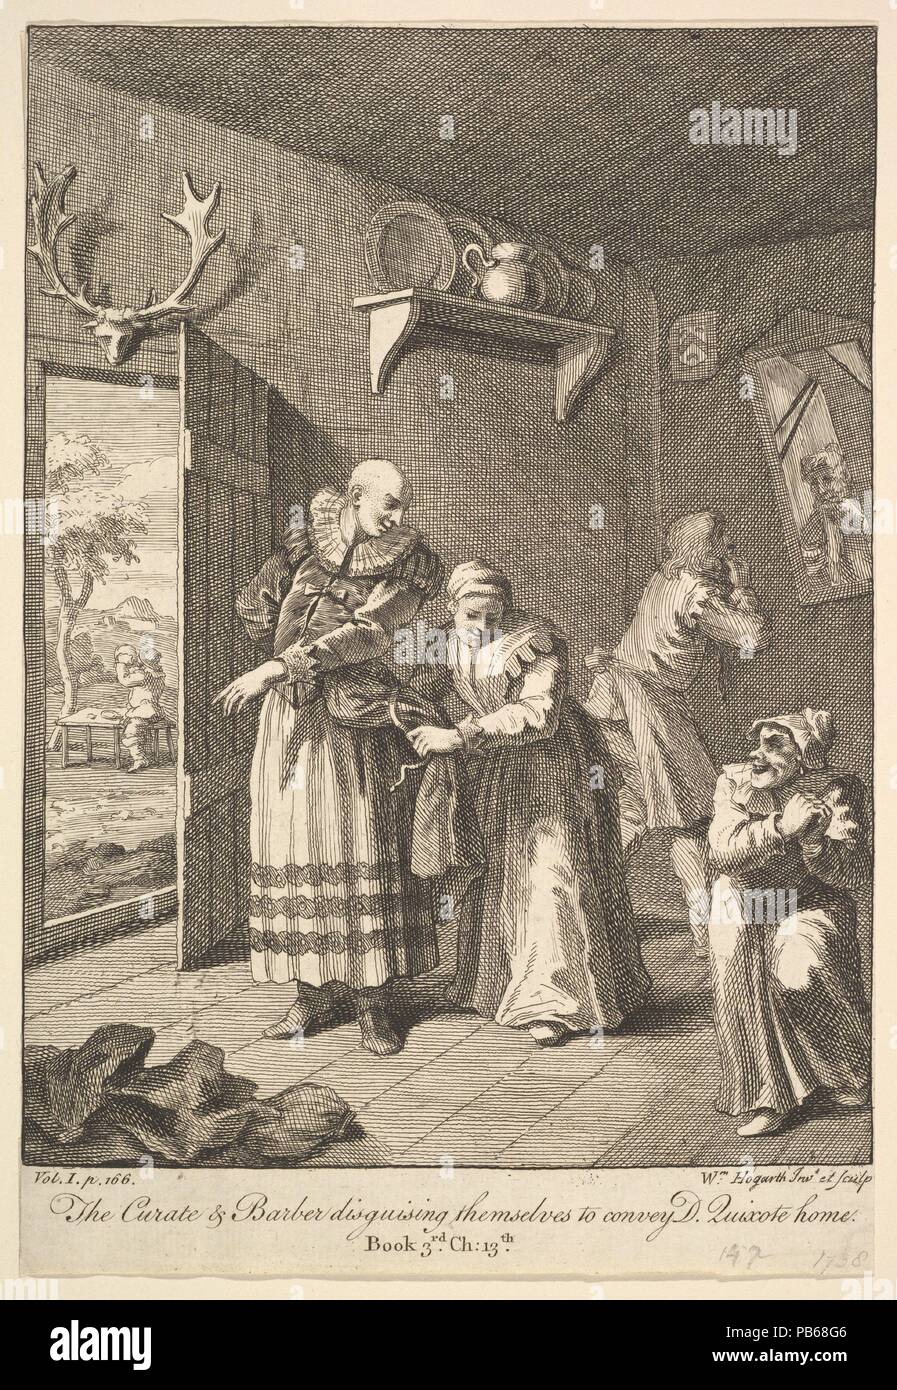 The Curate and Barber Disguising Themselves to Convey Don Quixote Home (Six Illustrations for Don Quixote). Artist: William Hogarth (British, London 1697-1764 London). Author: Illustrates Miguel de Cervantes Saavedra (Spanish, Alcalá 1547-1616 Madrid). Dimensions: sheet: 9 5/8 x 6 11/16 in. (24.5 x 17 cm). Date: 1756 or after. Museum: Metropolitan Museum of Art, New York, USA. Stock Photo